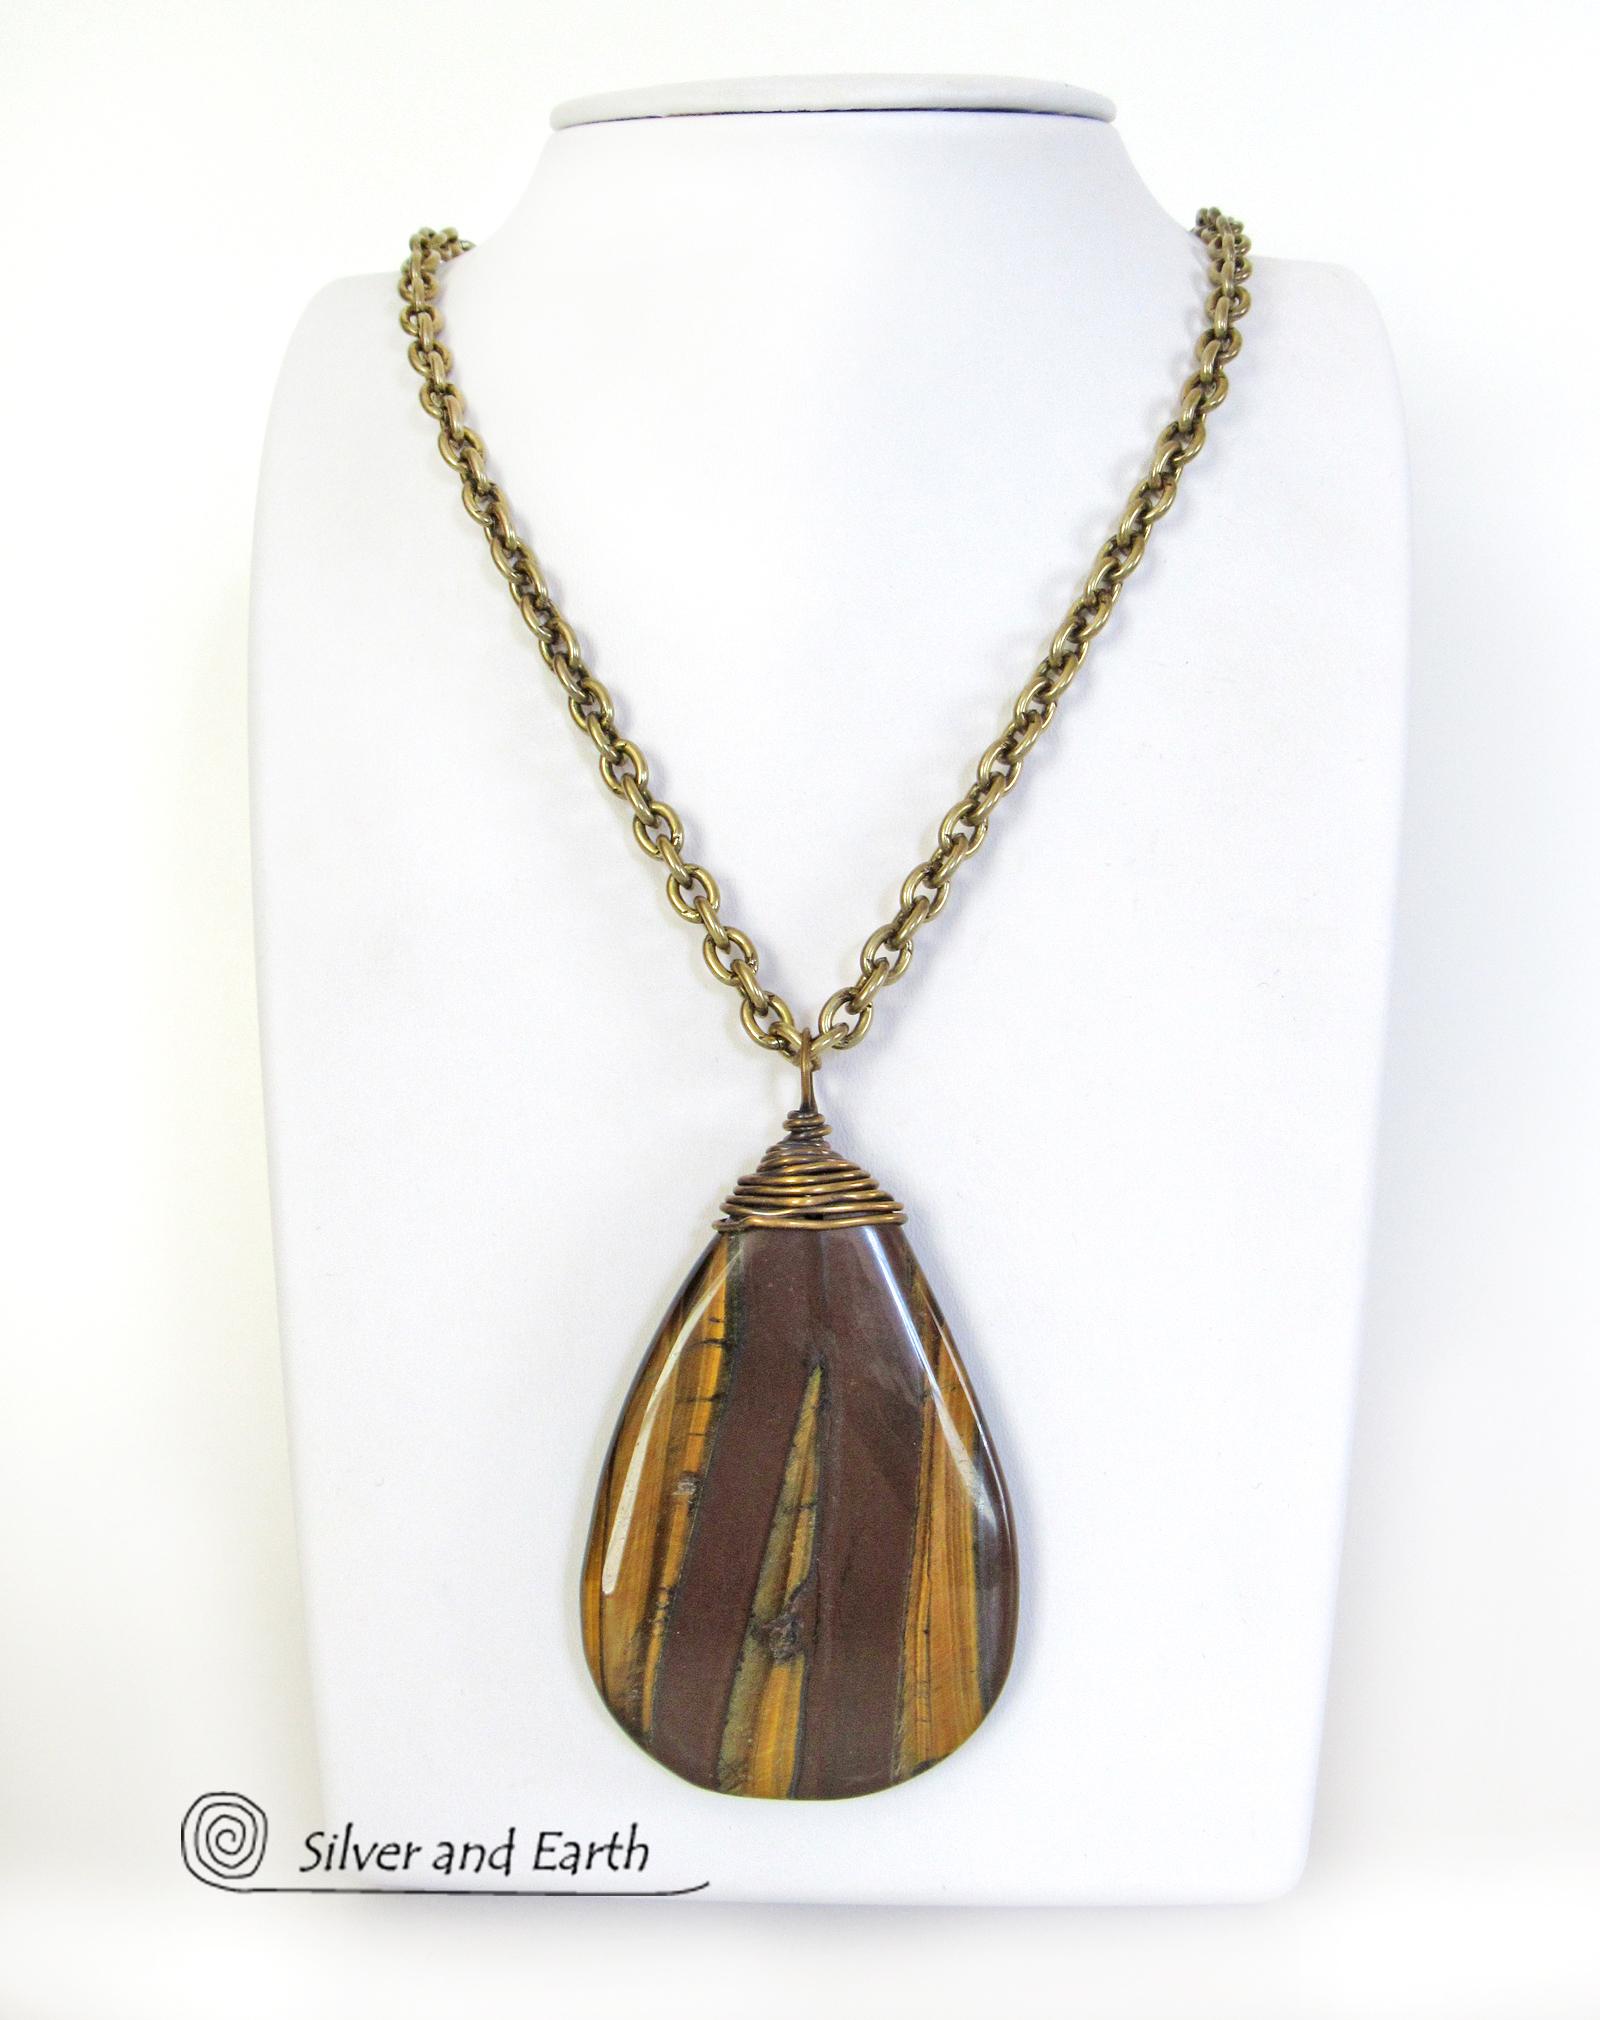 Large Tiger's Eye Gemstone Pendant Necklace- Earthy Natural Stone Jewelry